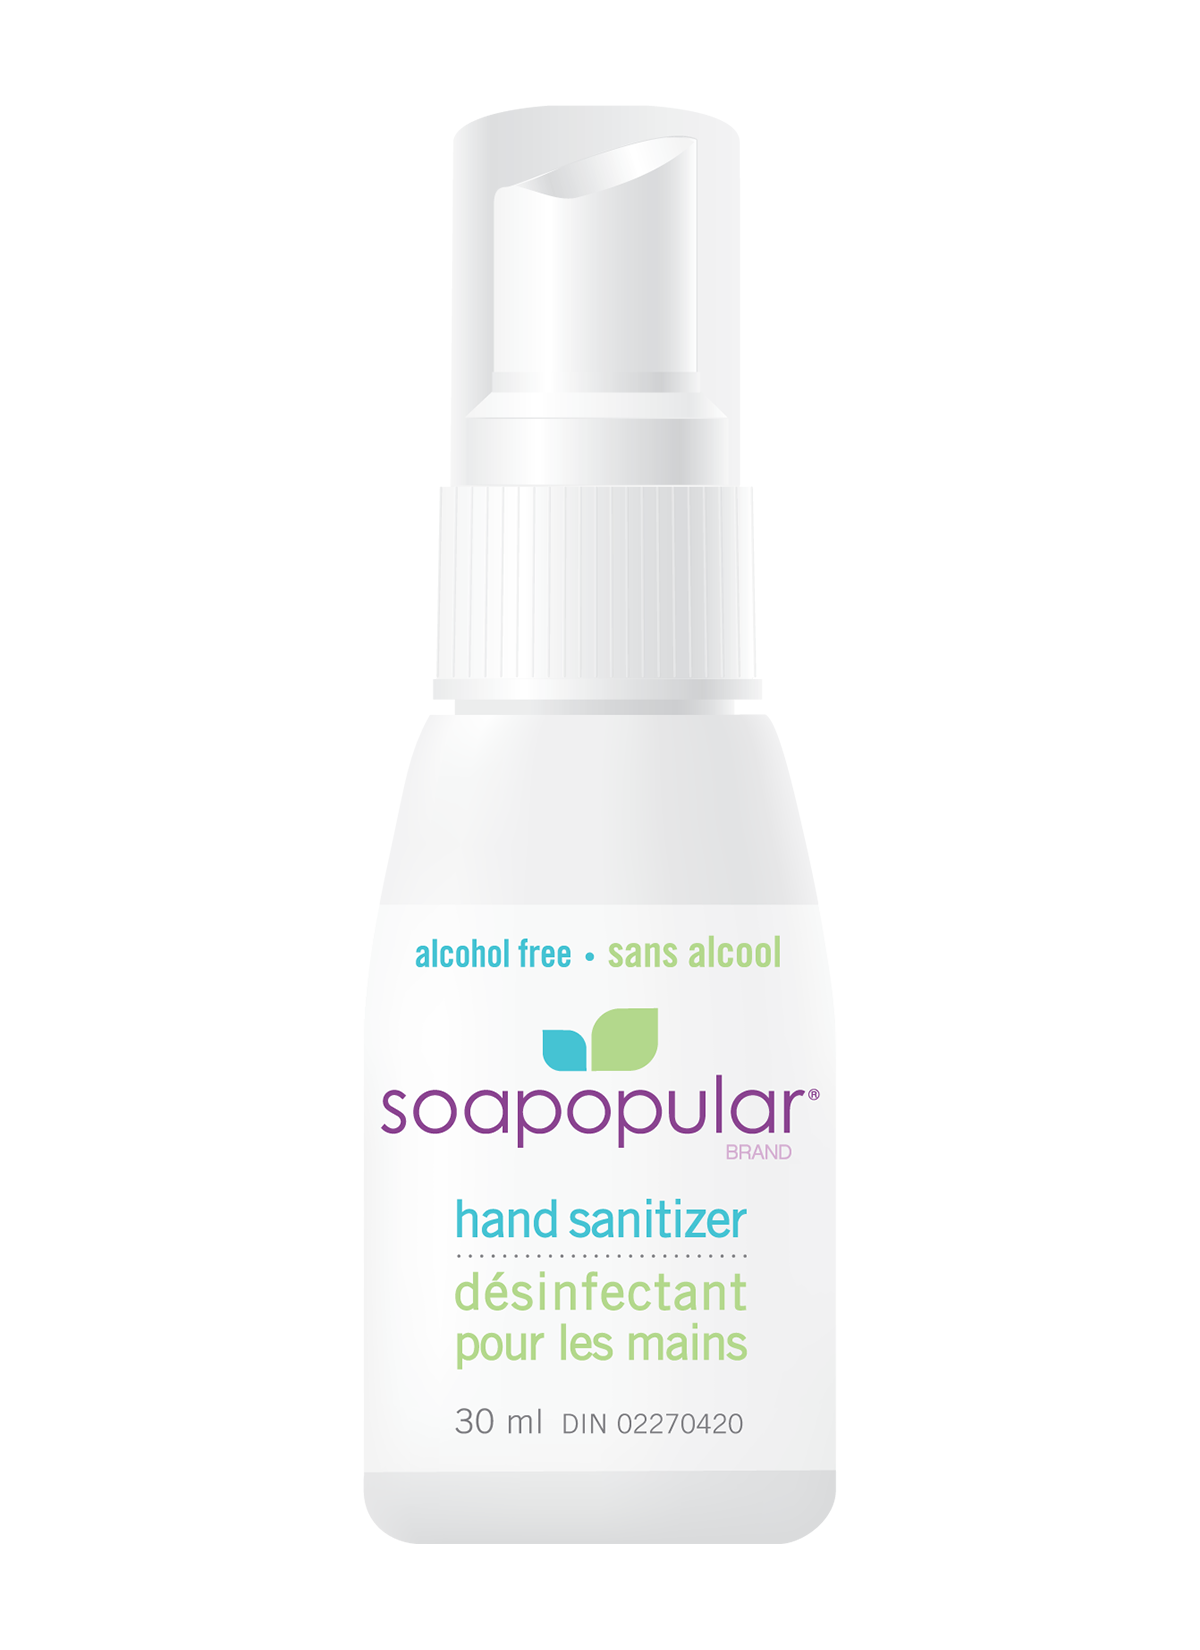 Soapopular alcohol free hand sanitizer comes in a 30mL size.